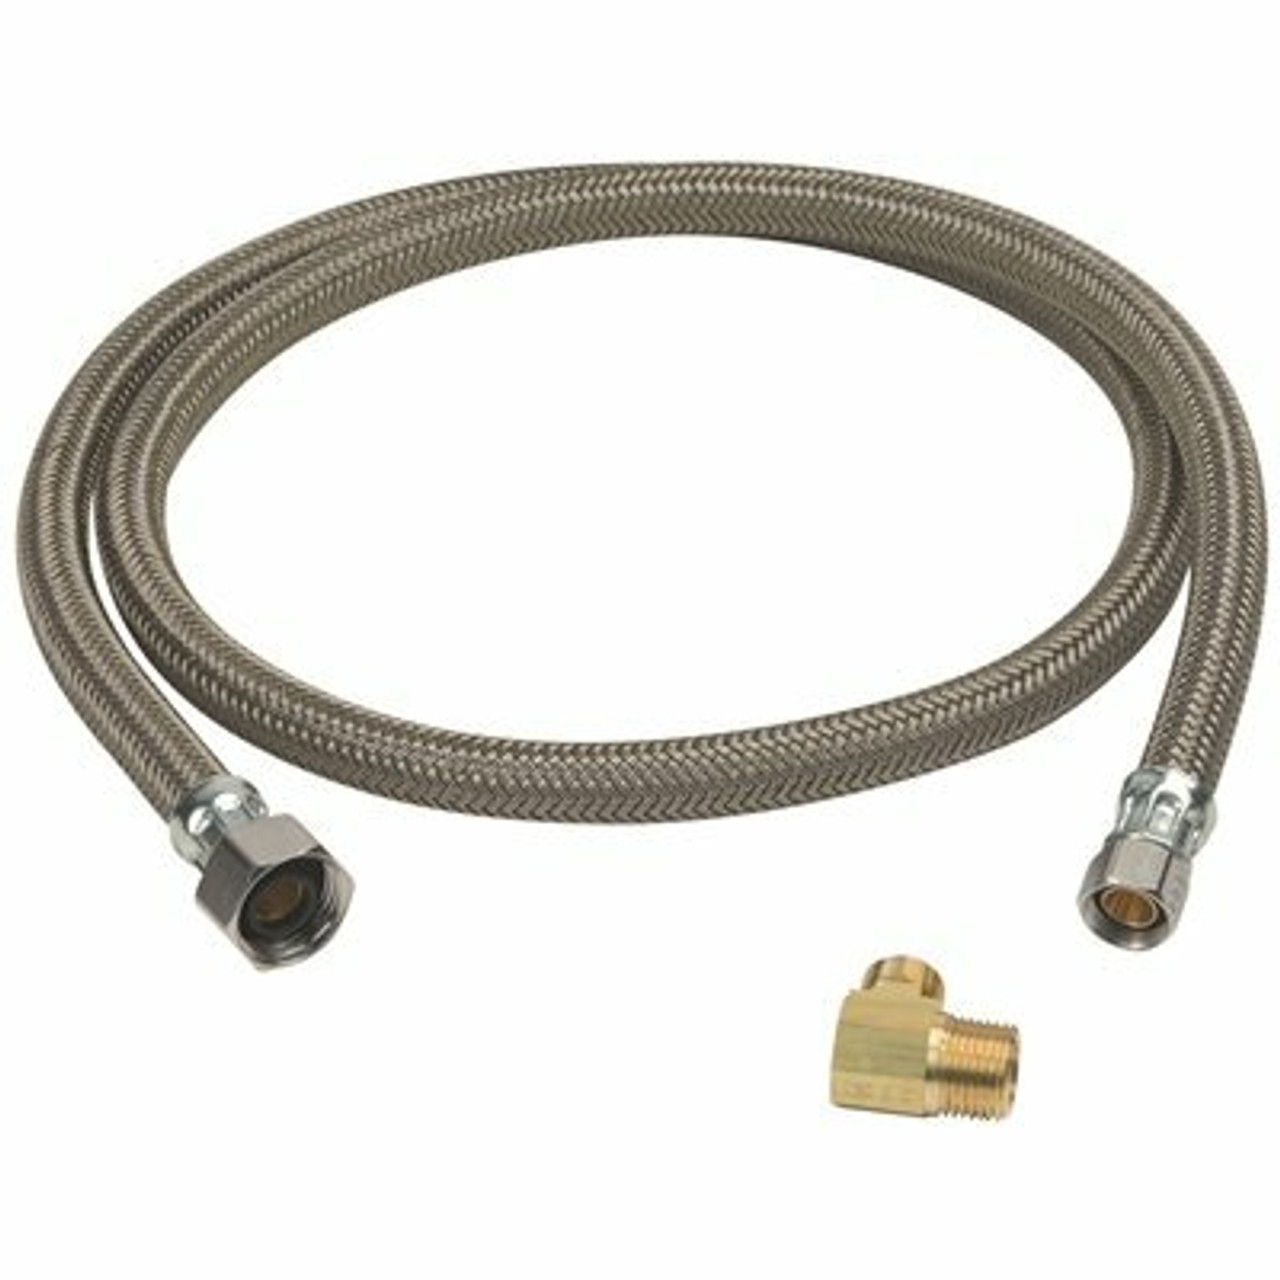 Brasscraft 1/2 In. Fip X 3/8 In. Compression X 48 In. Braided Polymer Dishwasher Connector With 3/8 In. Compression Elbow